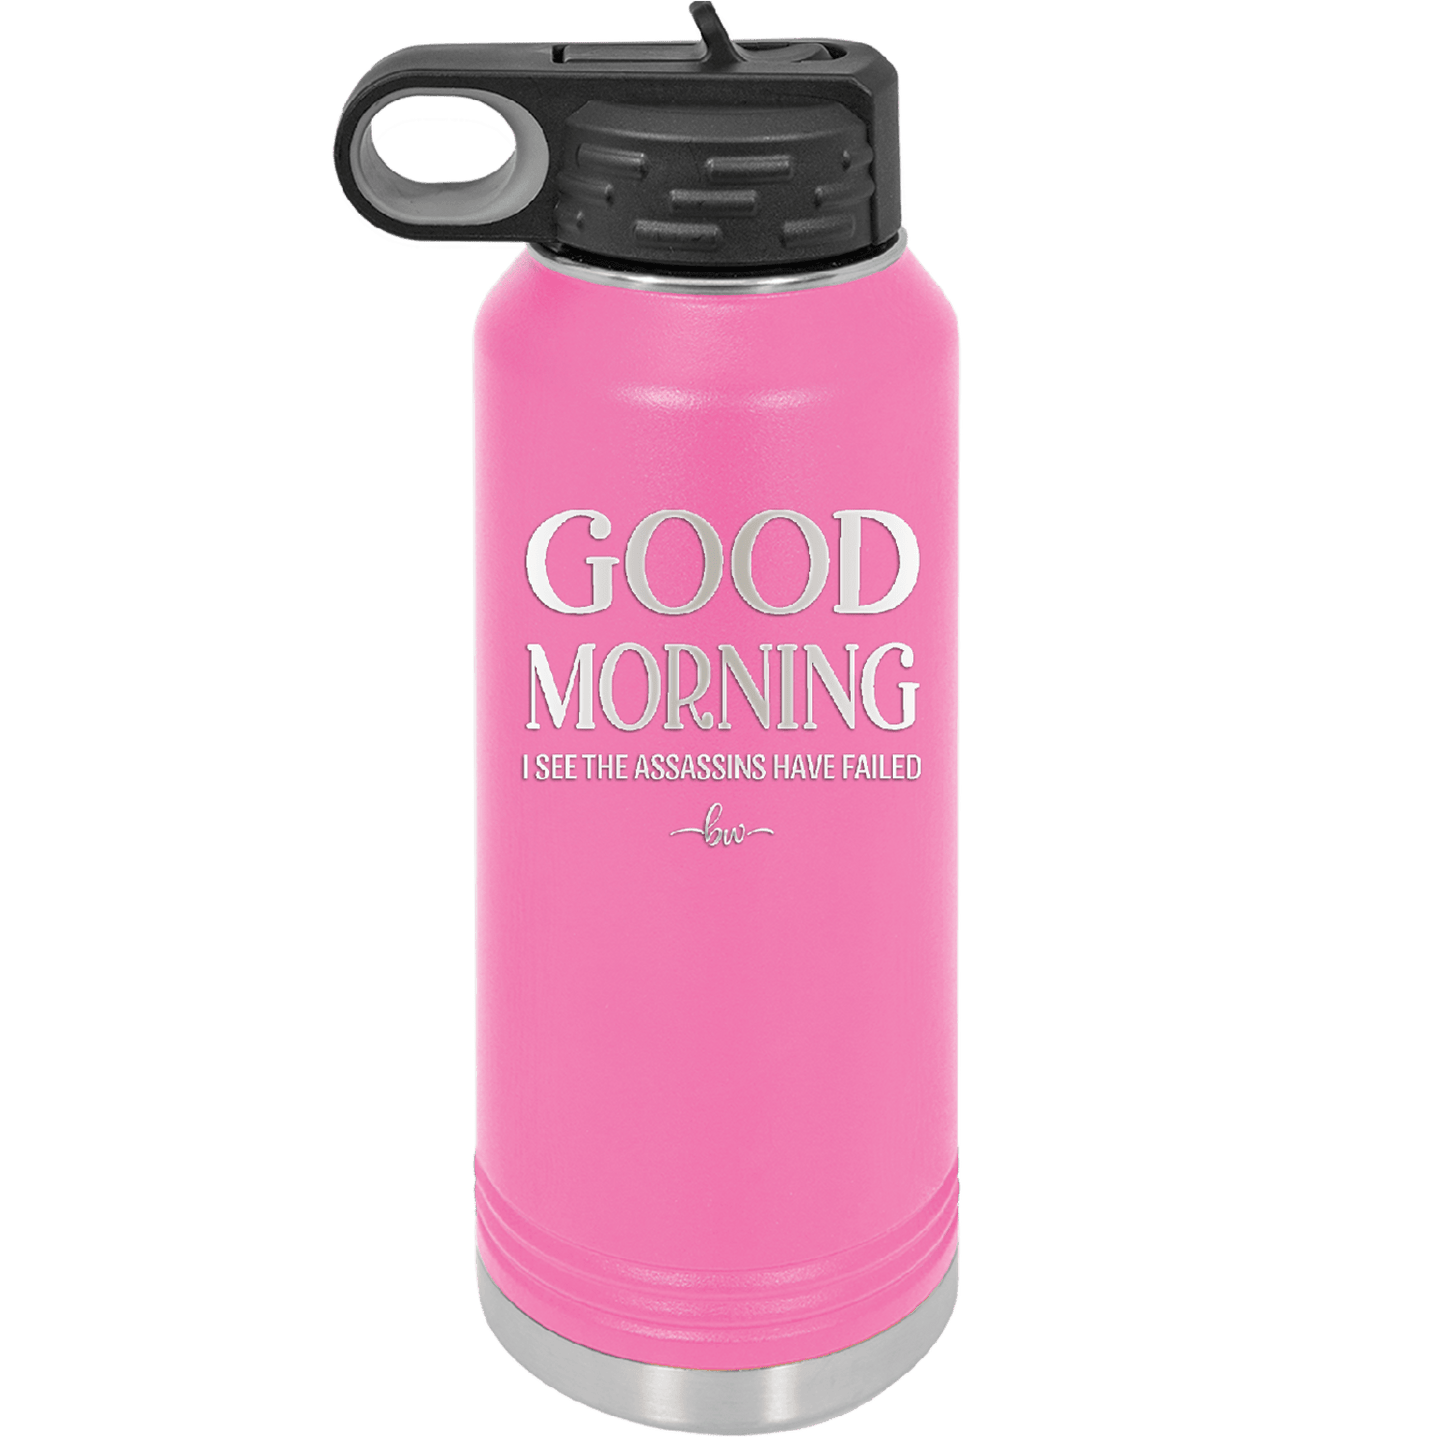 Good Morning I See the Assassins Have Failed 1 - Laser Engraved Stainless Steel Drinkware - 1632 -